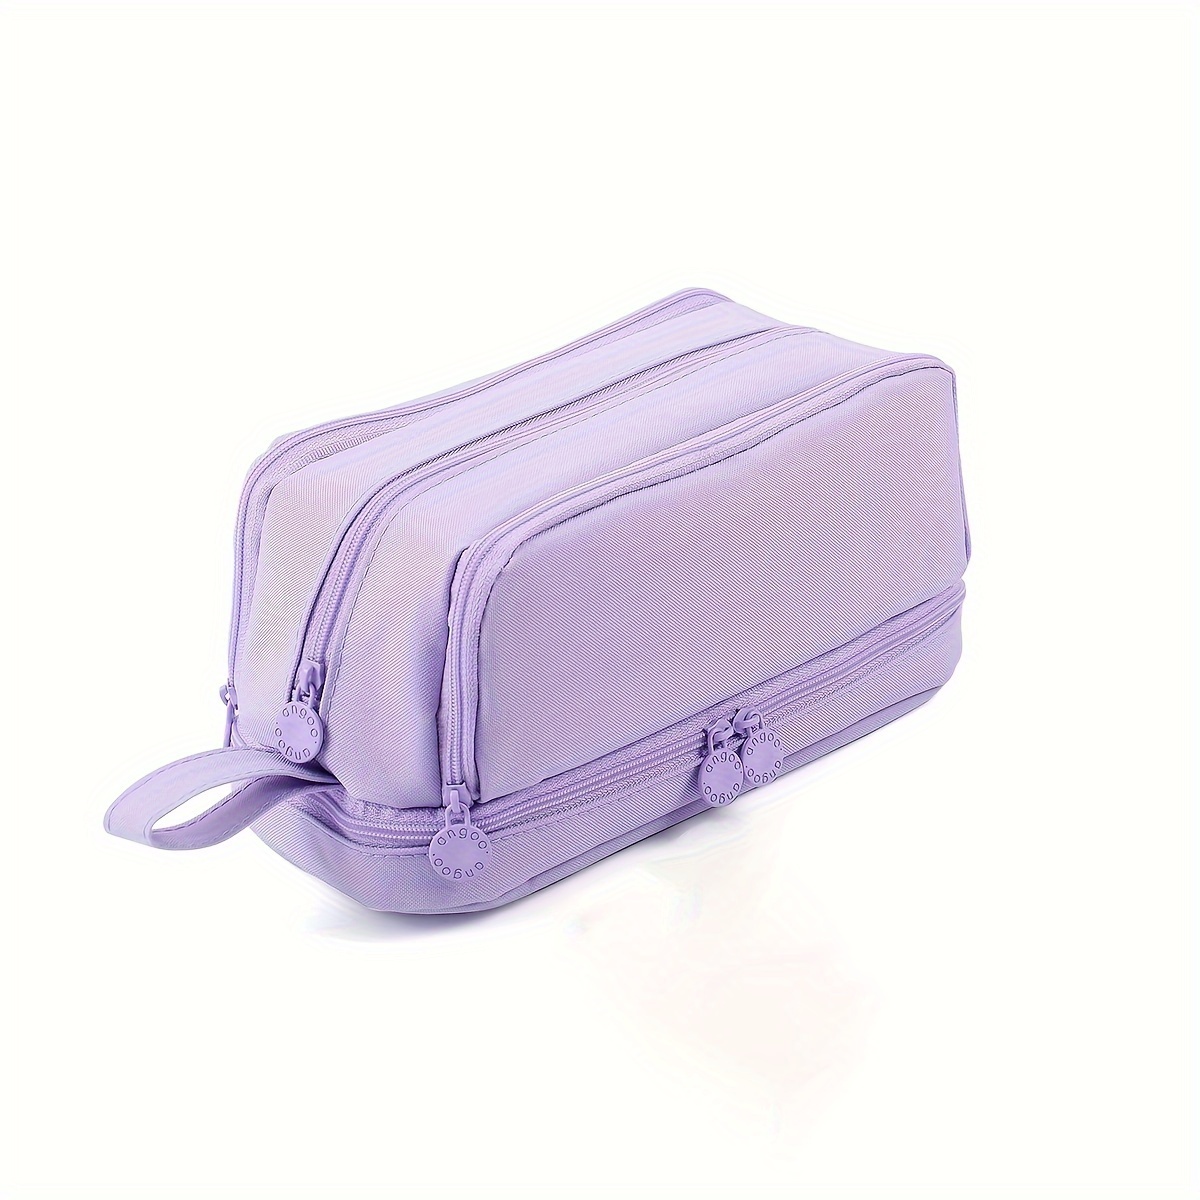 Large Pencil Case,Pencil Pouch With Zipper Compartments,Aesthetic